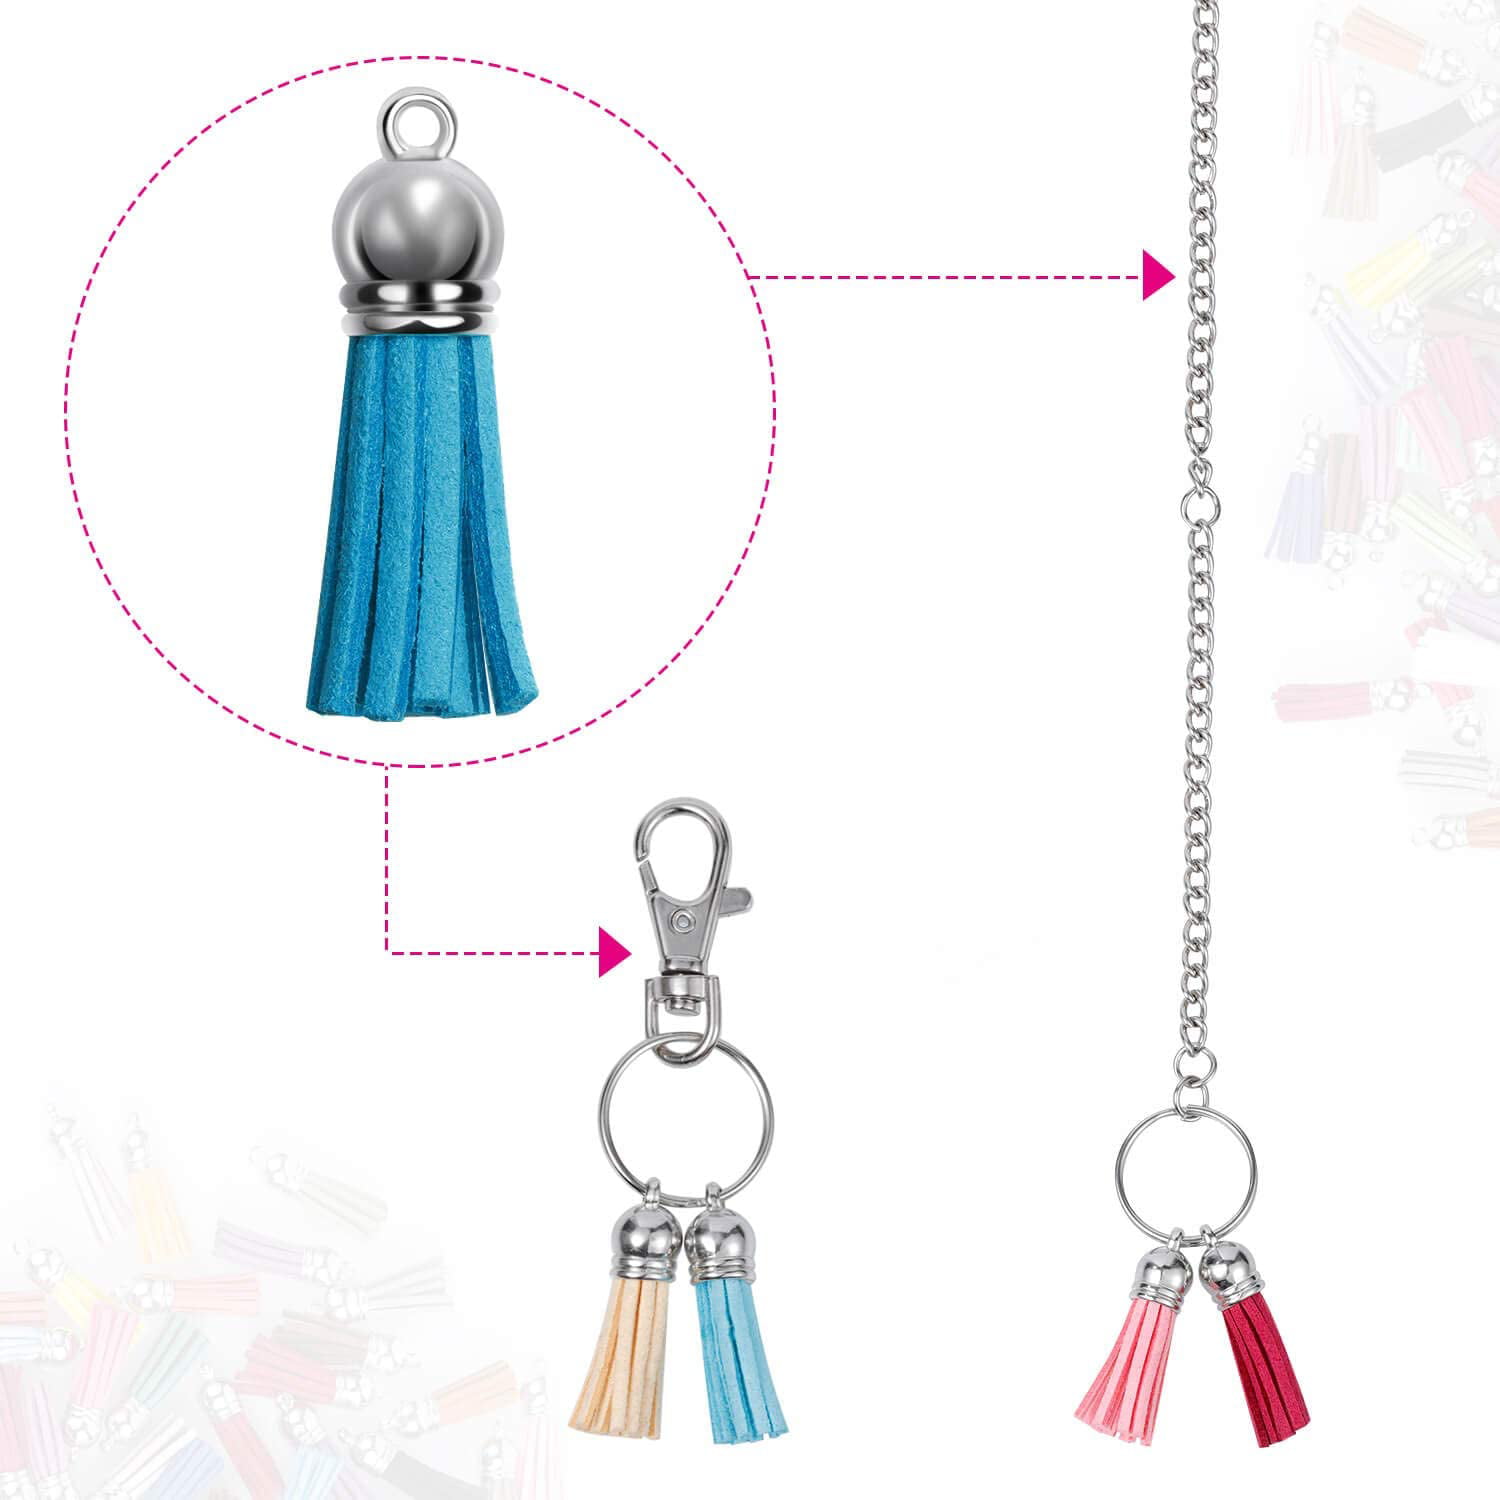 100 Keychain Tassels Leather Keychain Tassels Bulk with Sliver Key Chain Rings with Chain and Jump Rings for DIY Tassel Keychain Crafts Jewelry Making 300 Pieces Make Keychain Kit 